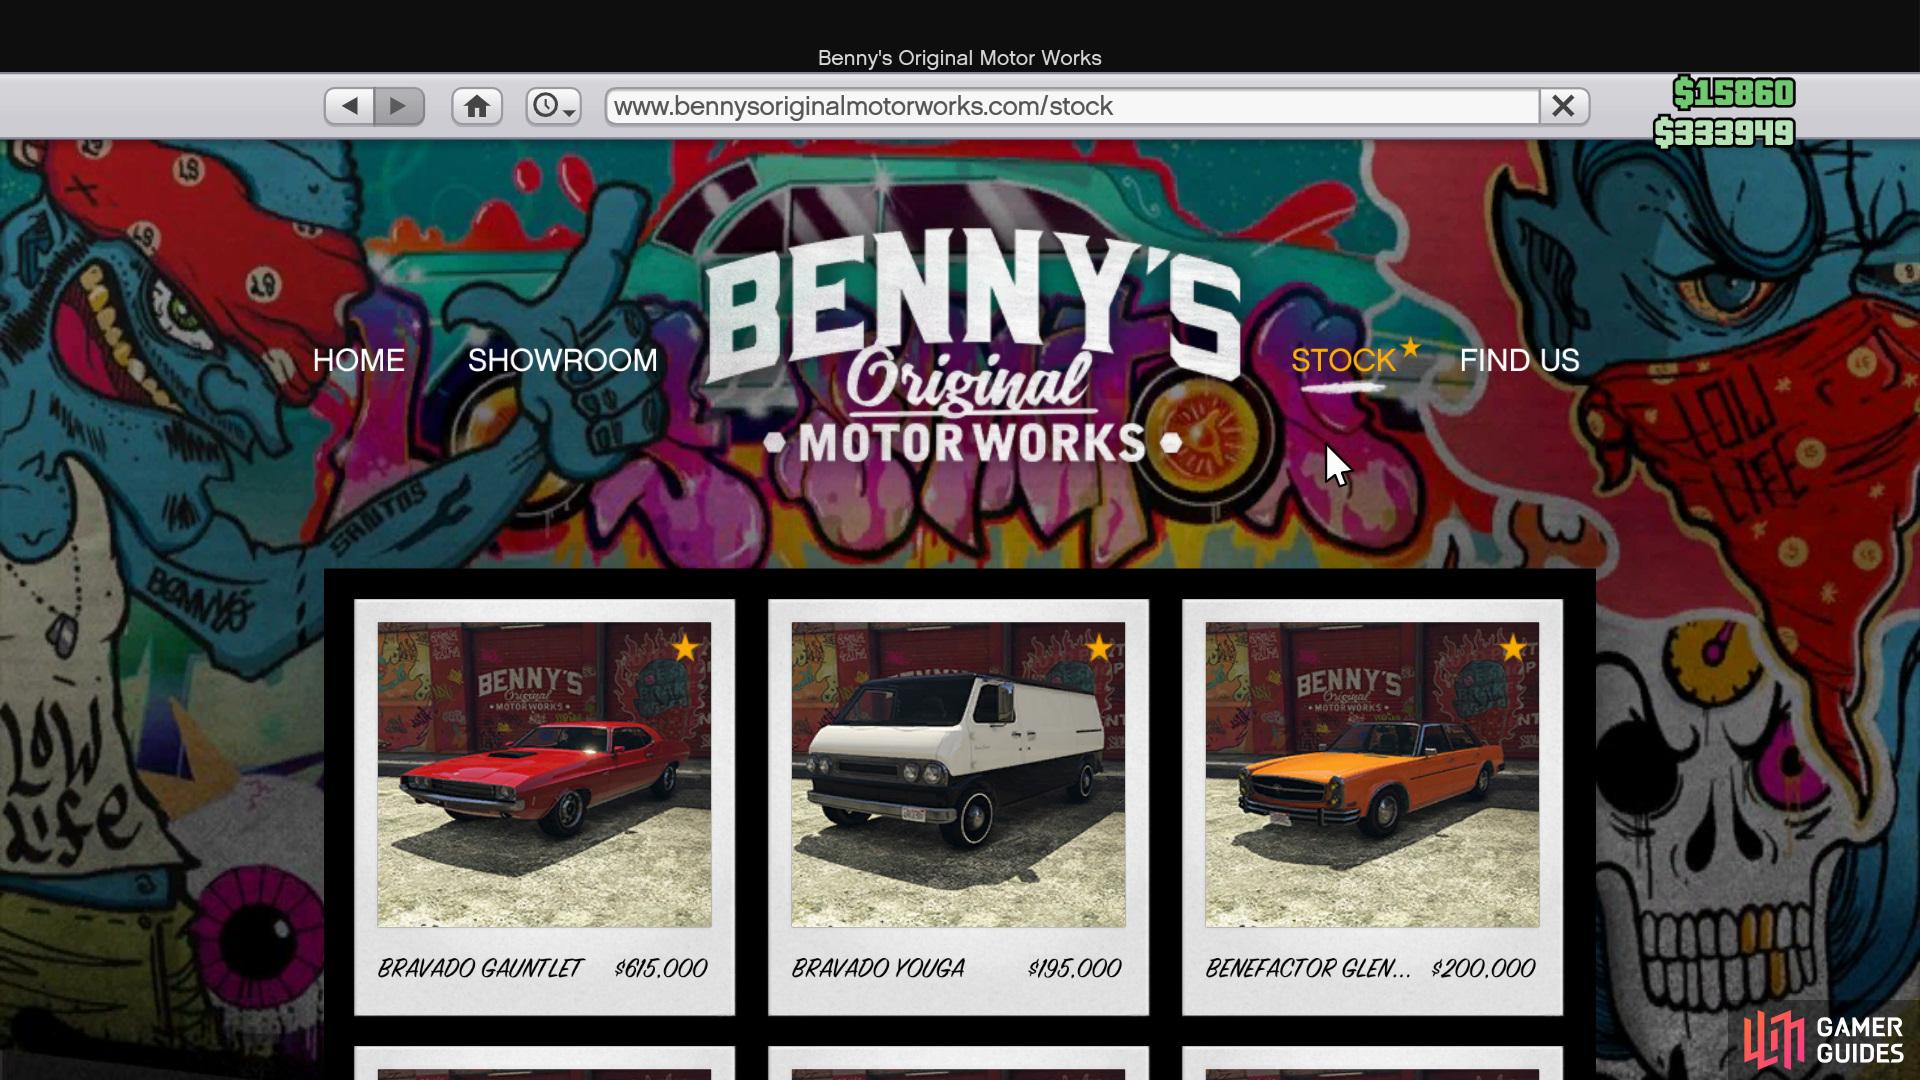 You can see the list of Benny's Vehicles via the website.